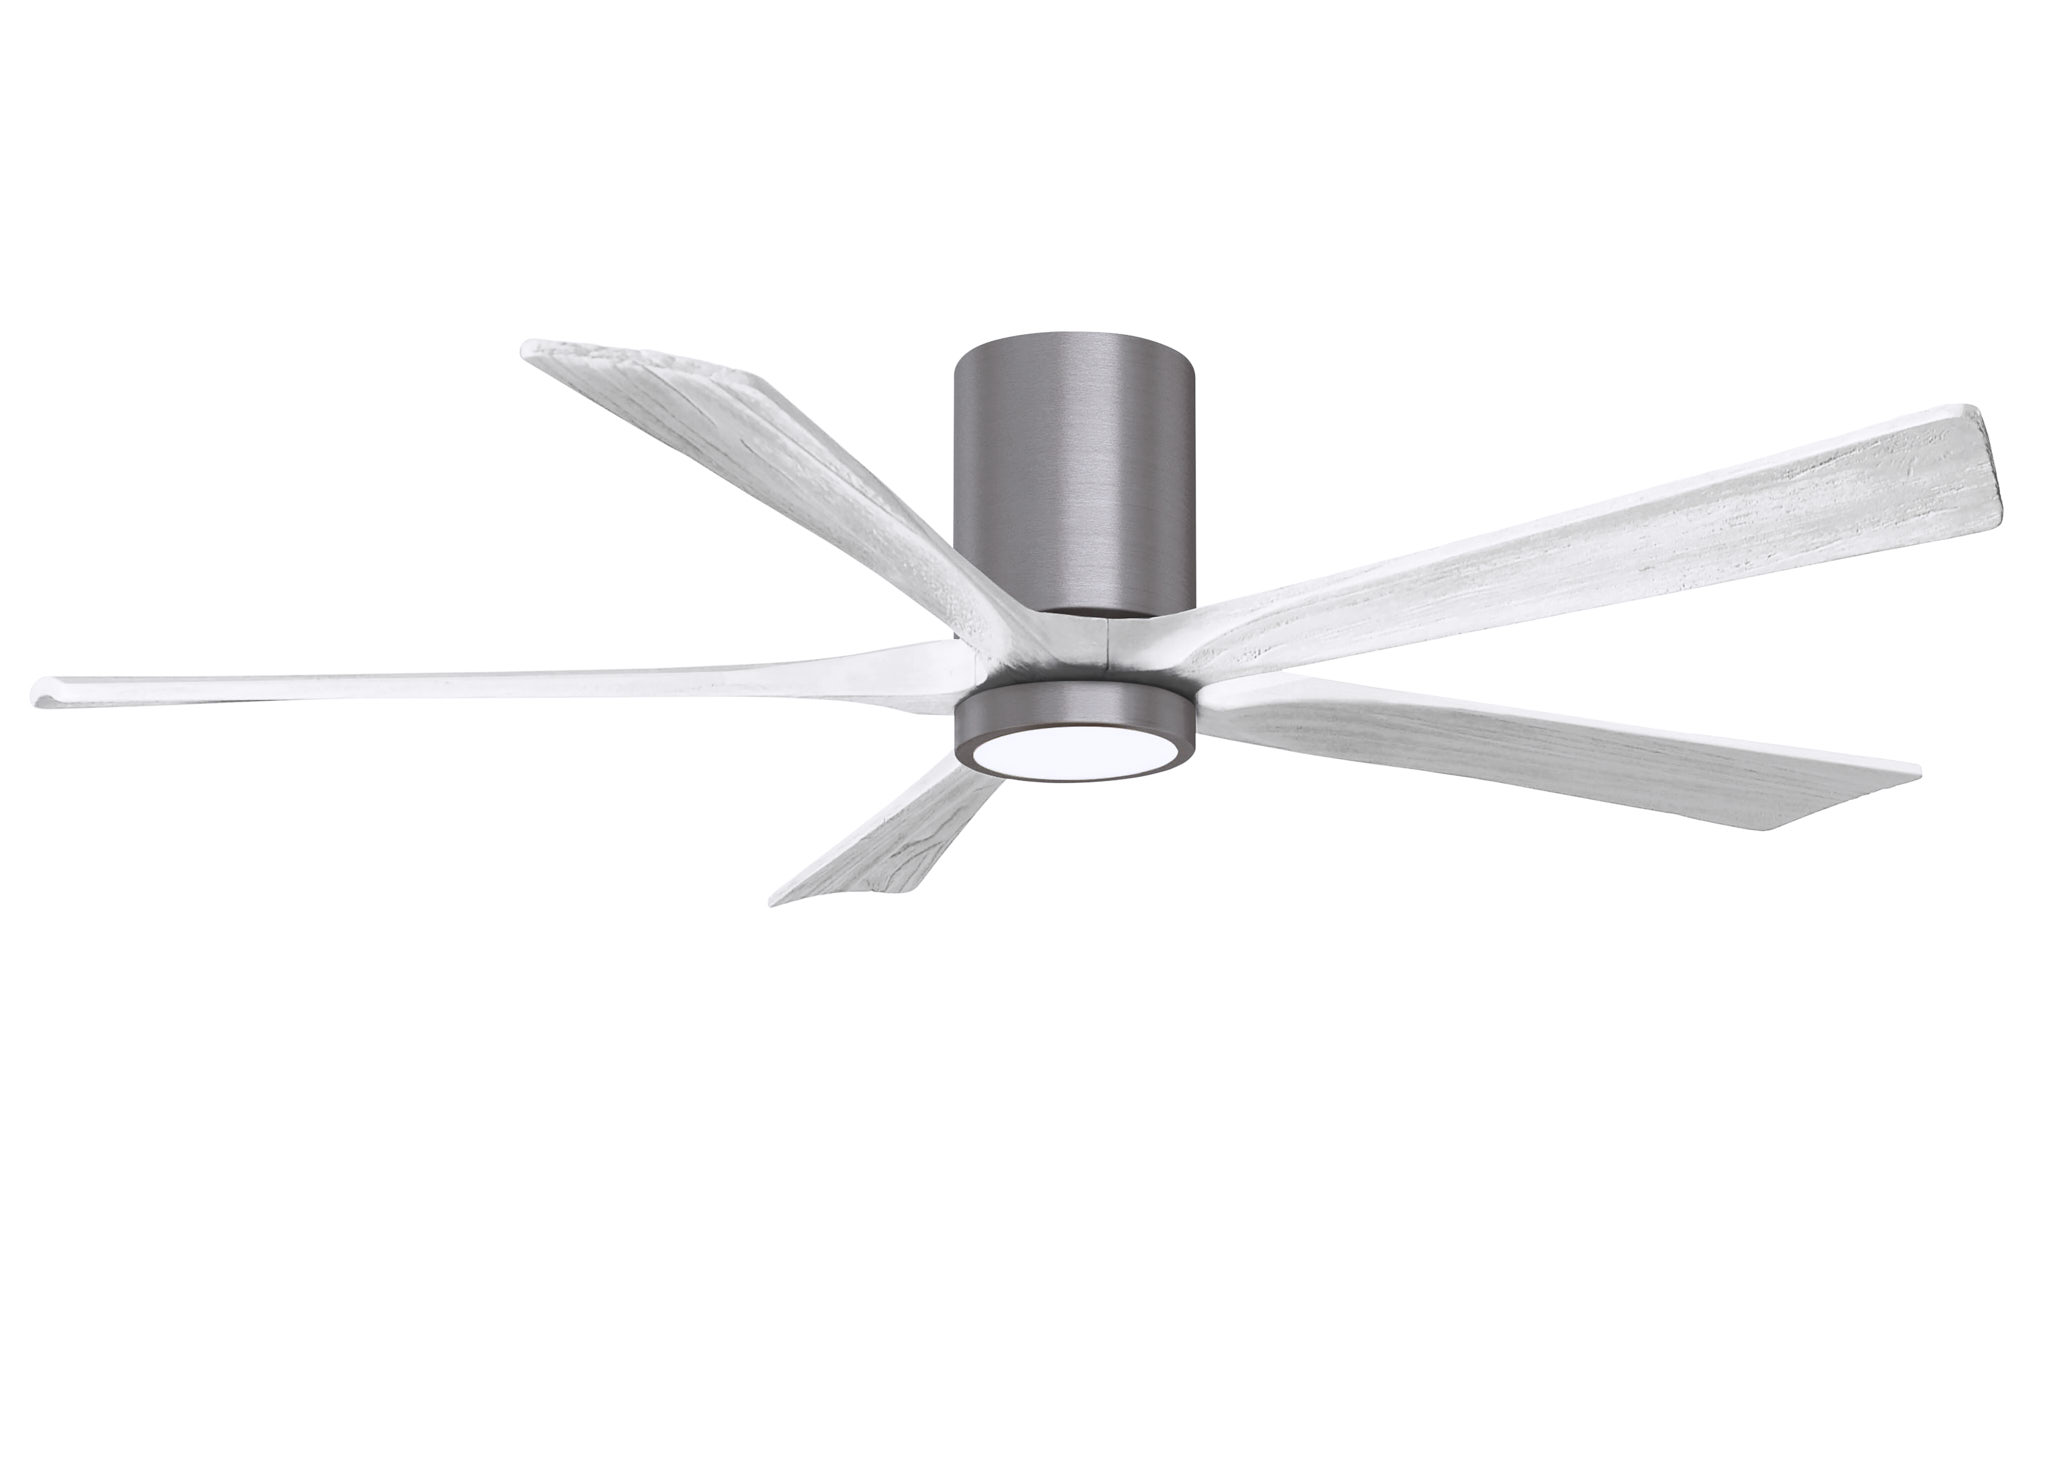 Irene-5HLK 6-speed ceiling fan in brushed pewter finish with 60